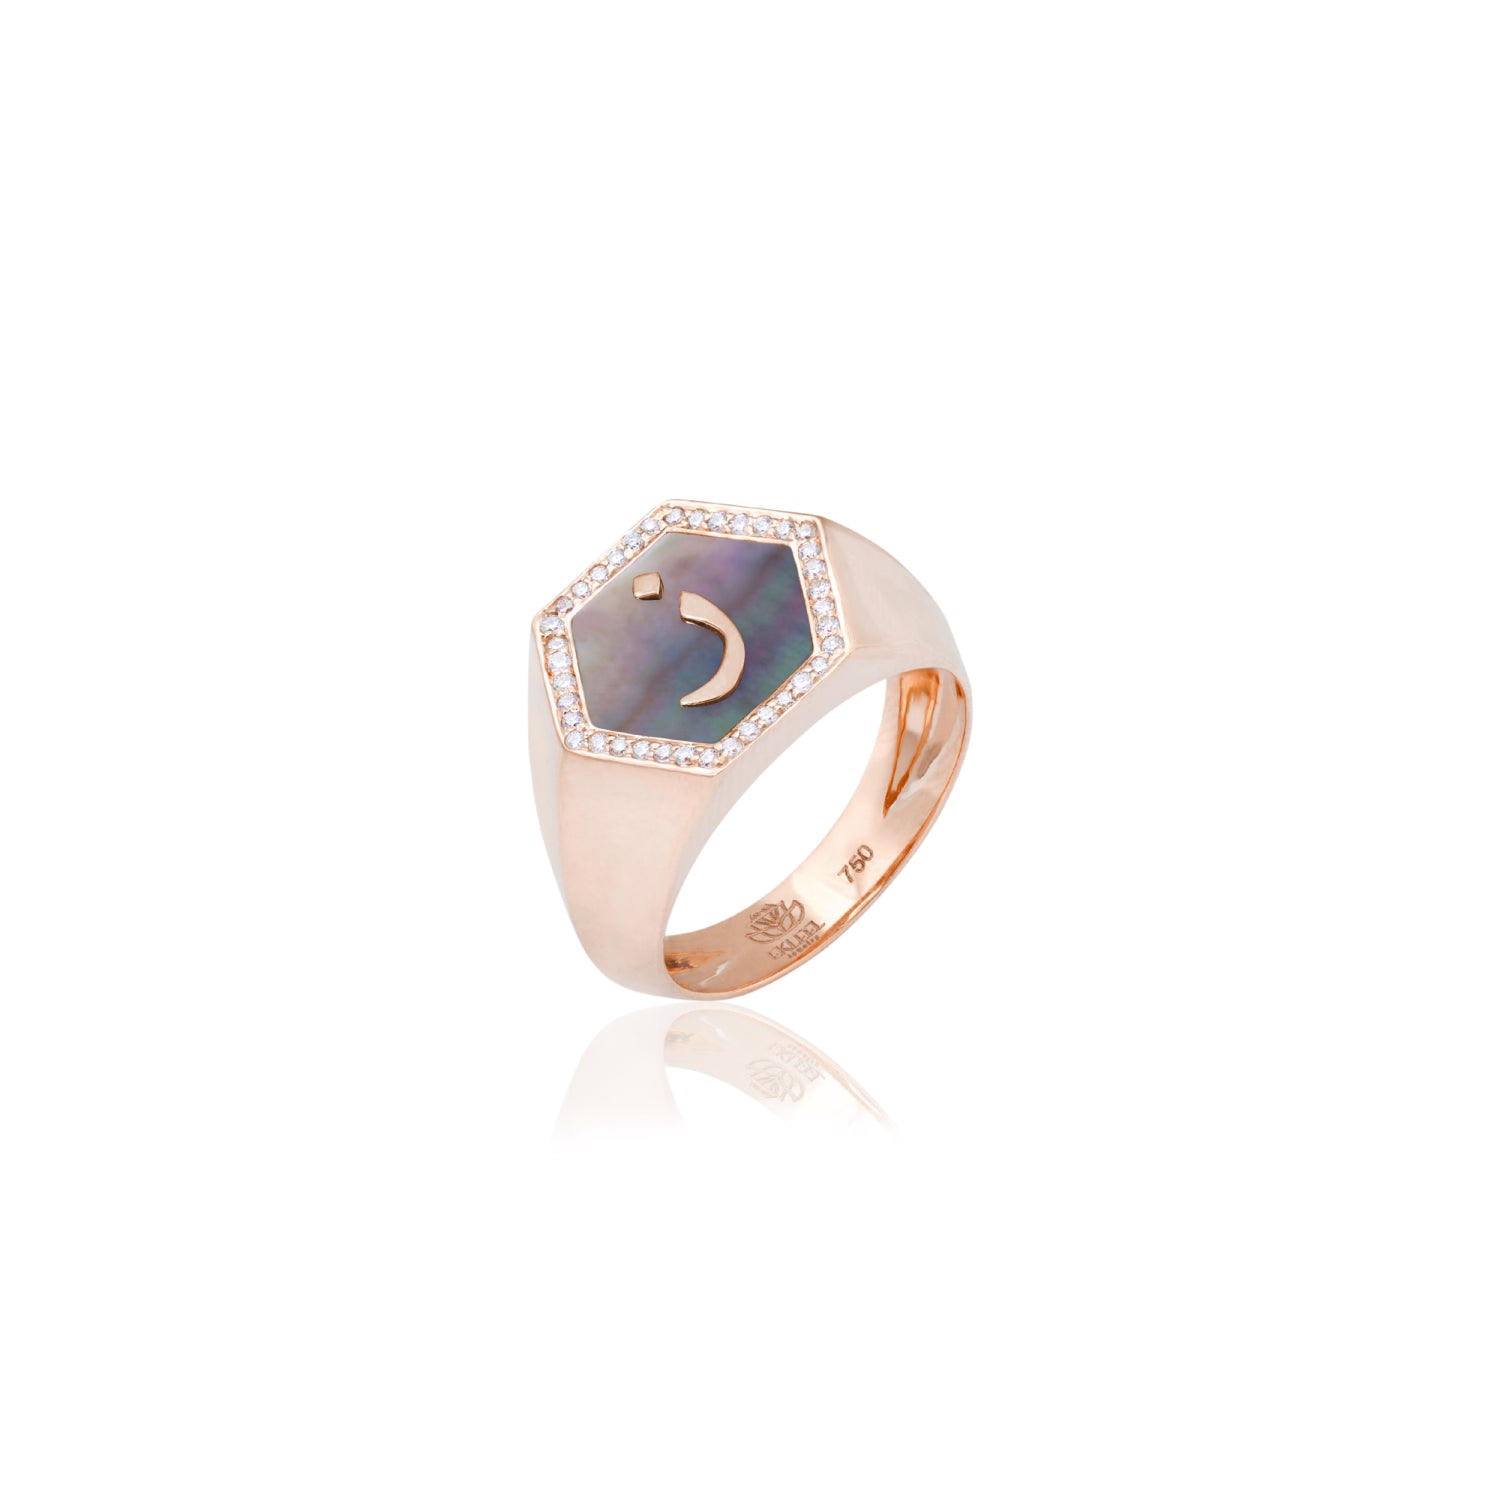 Qamoos 2.0 Letter ز Black Mother of Pearl and Diamond Signet Ring in Rose Gold